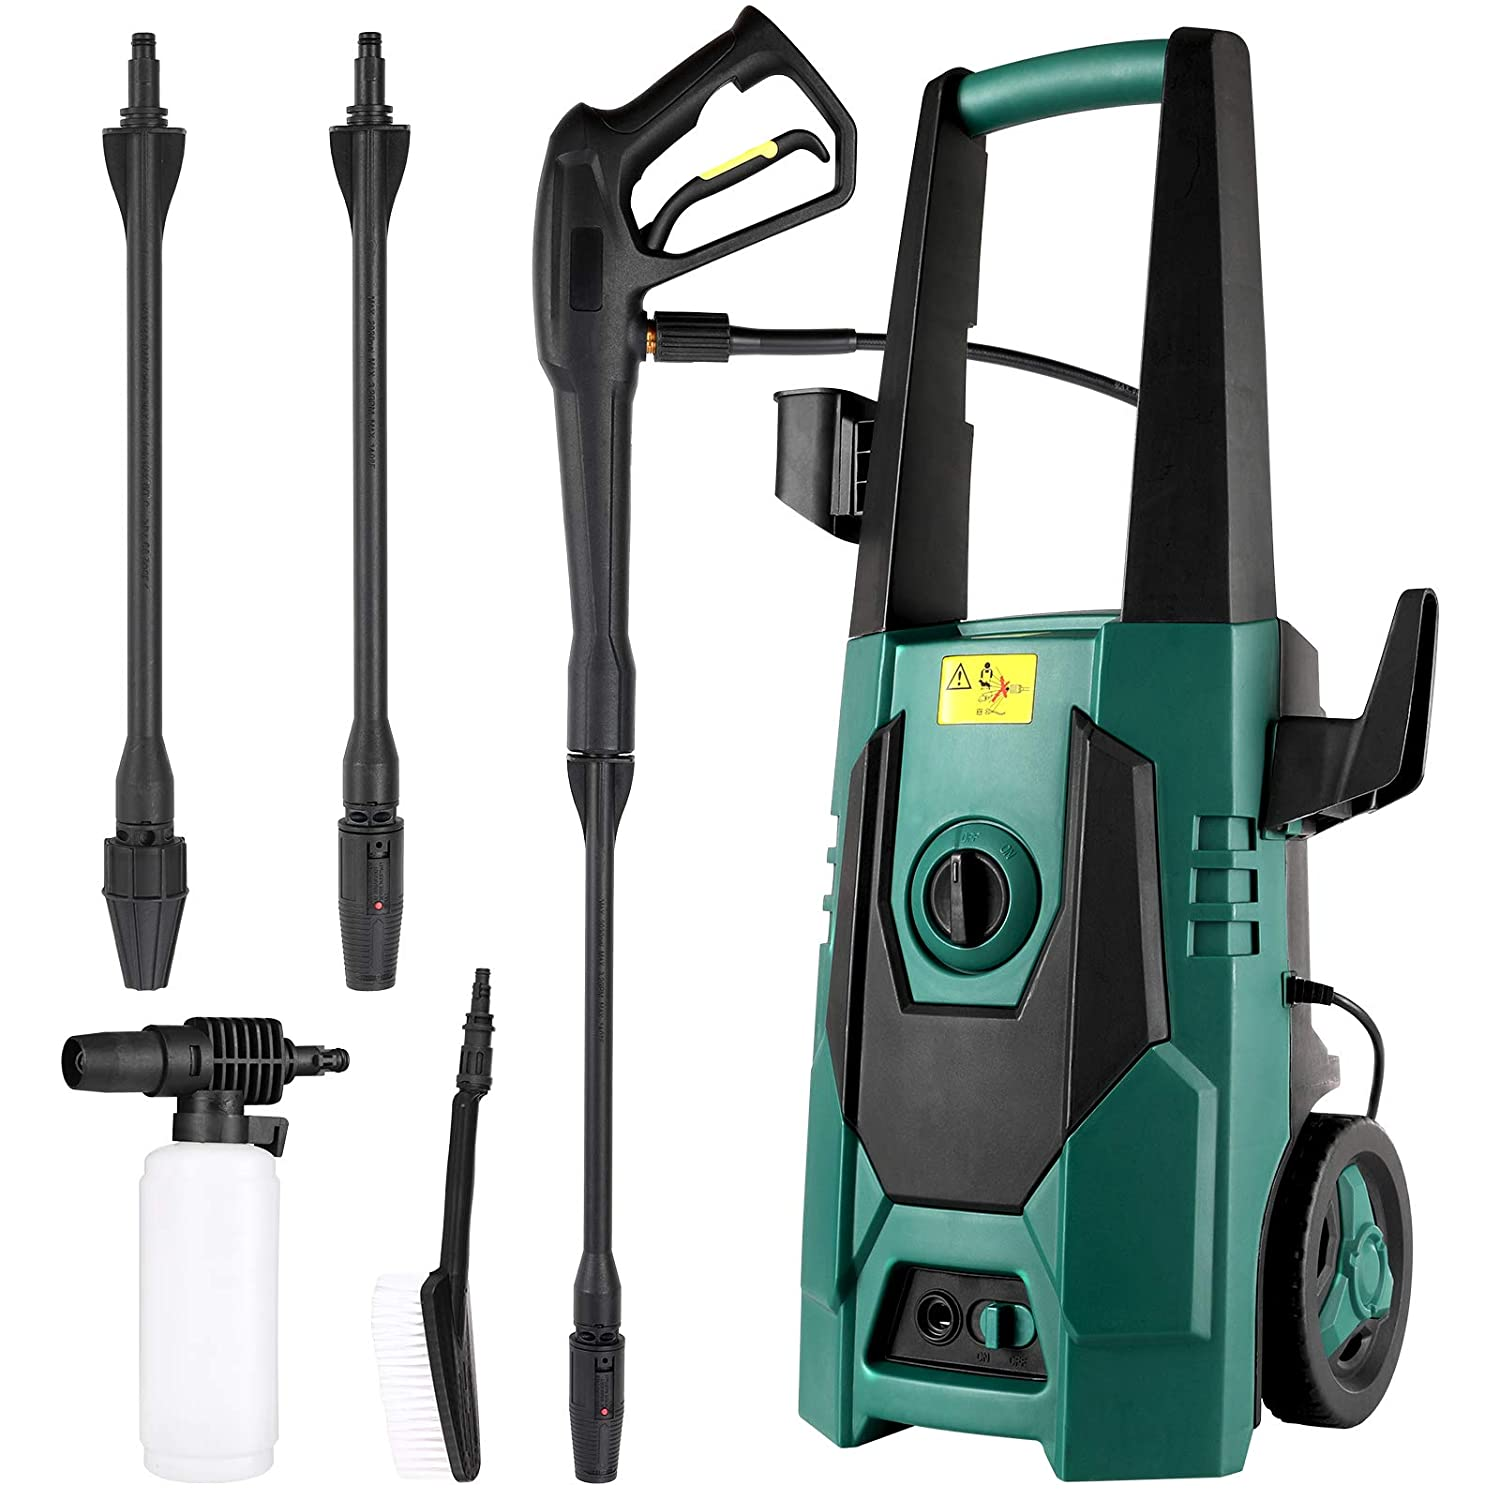  FIXKIT Electric Pressure Washer 